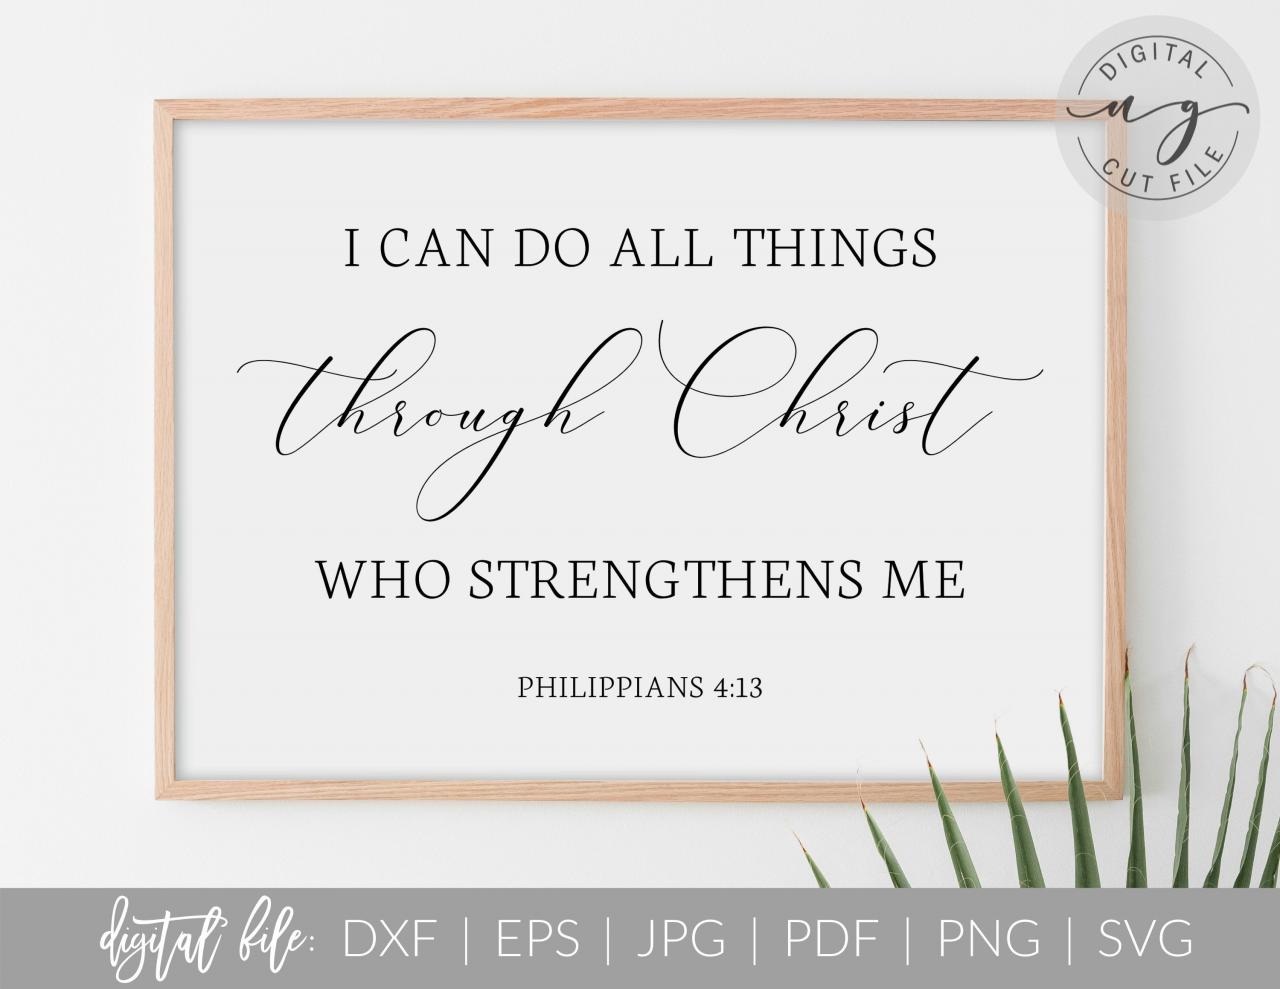 I Can Do All Things | Bible Verse Quote | Svg, Dxf Cut File | Pdf Print File | Cricut Cameo Silhouette | Png Clipart | Instant Download